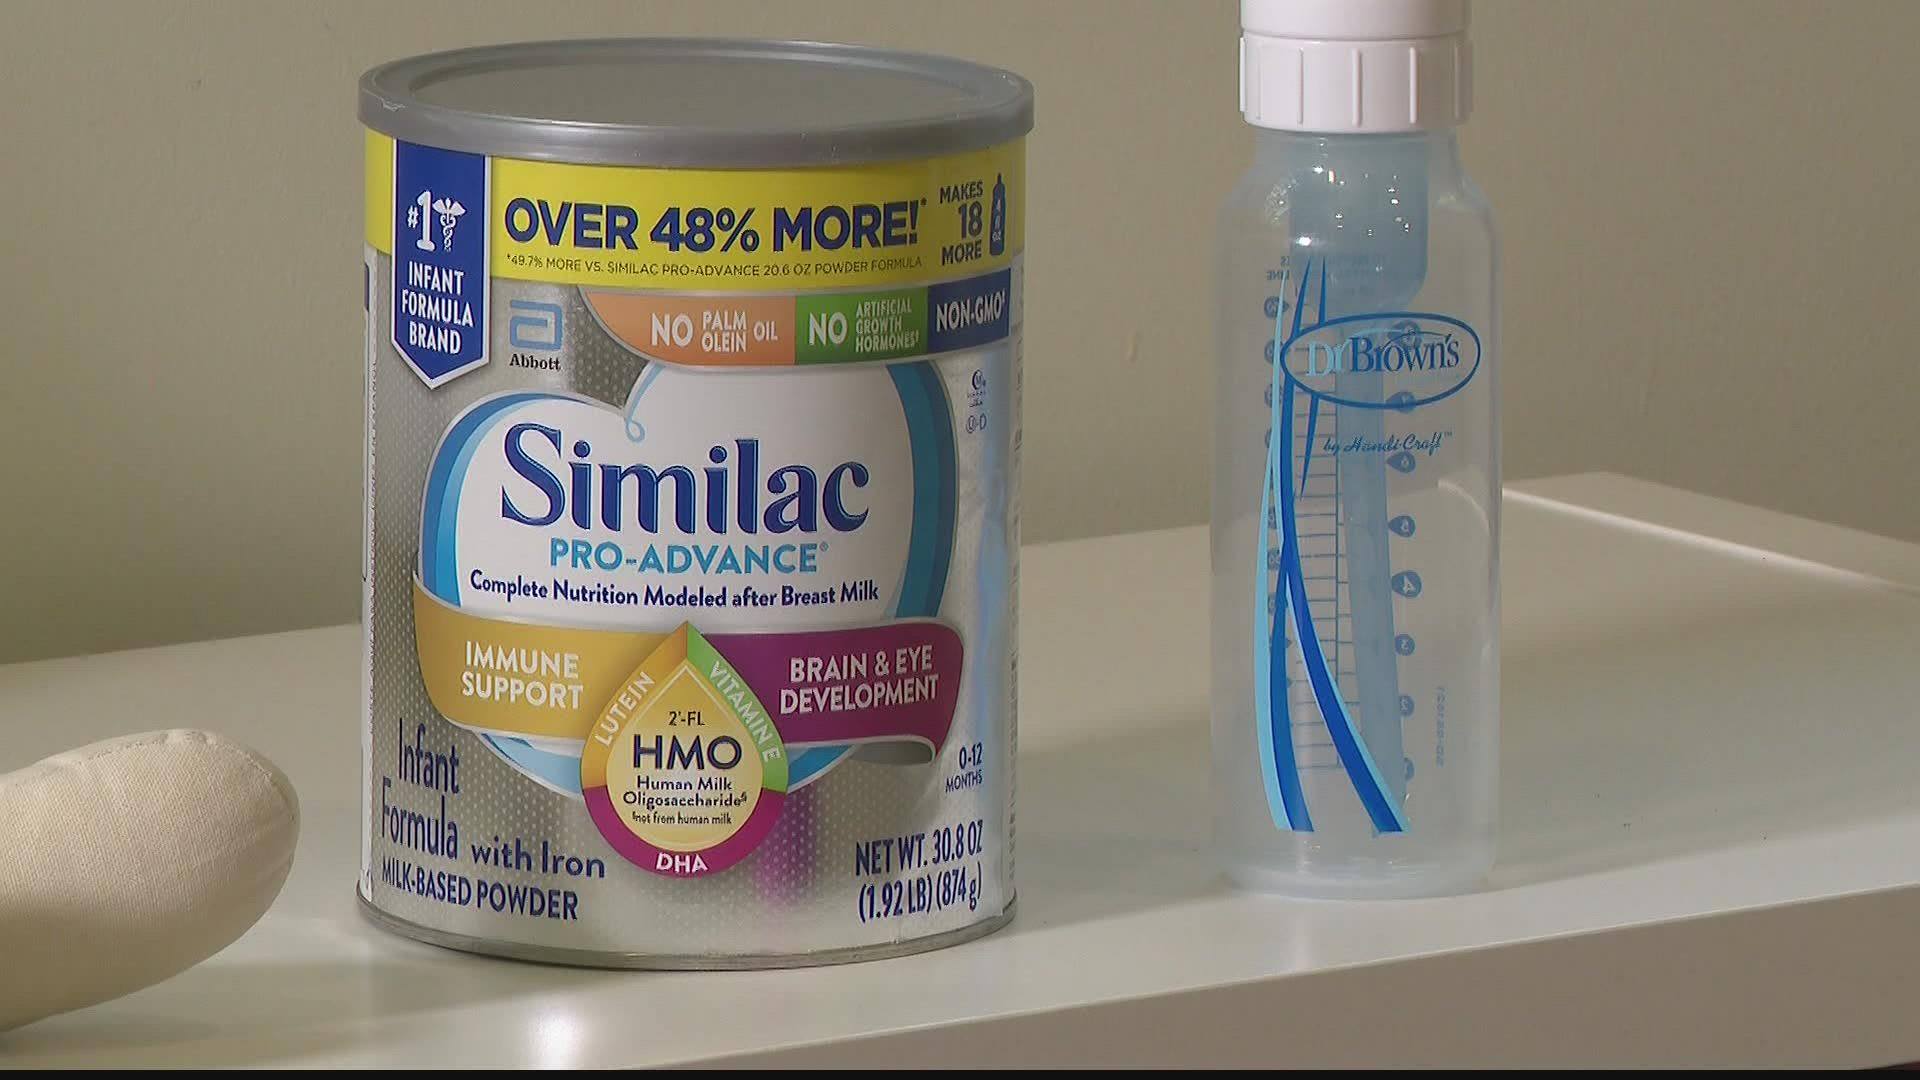 The baby formula shortage stems from supply chain disruptions and a safety recall by formula maker Abbott stemming from contamination concerns.